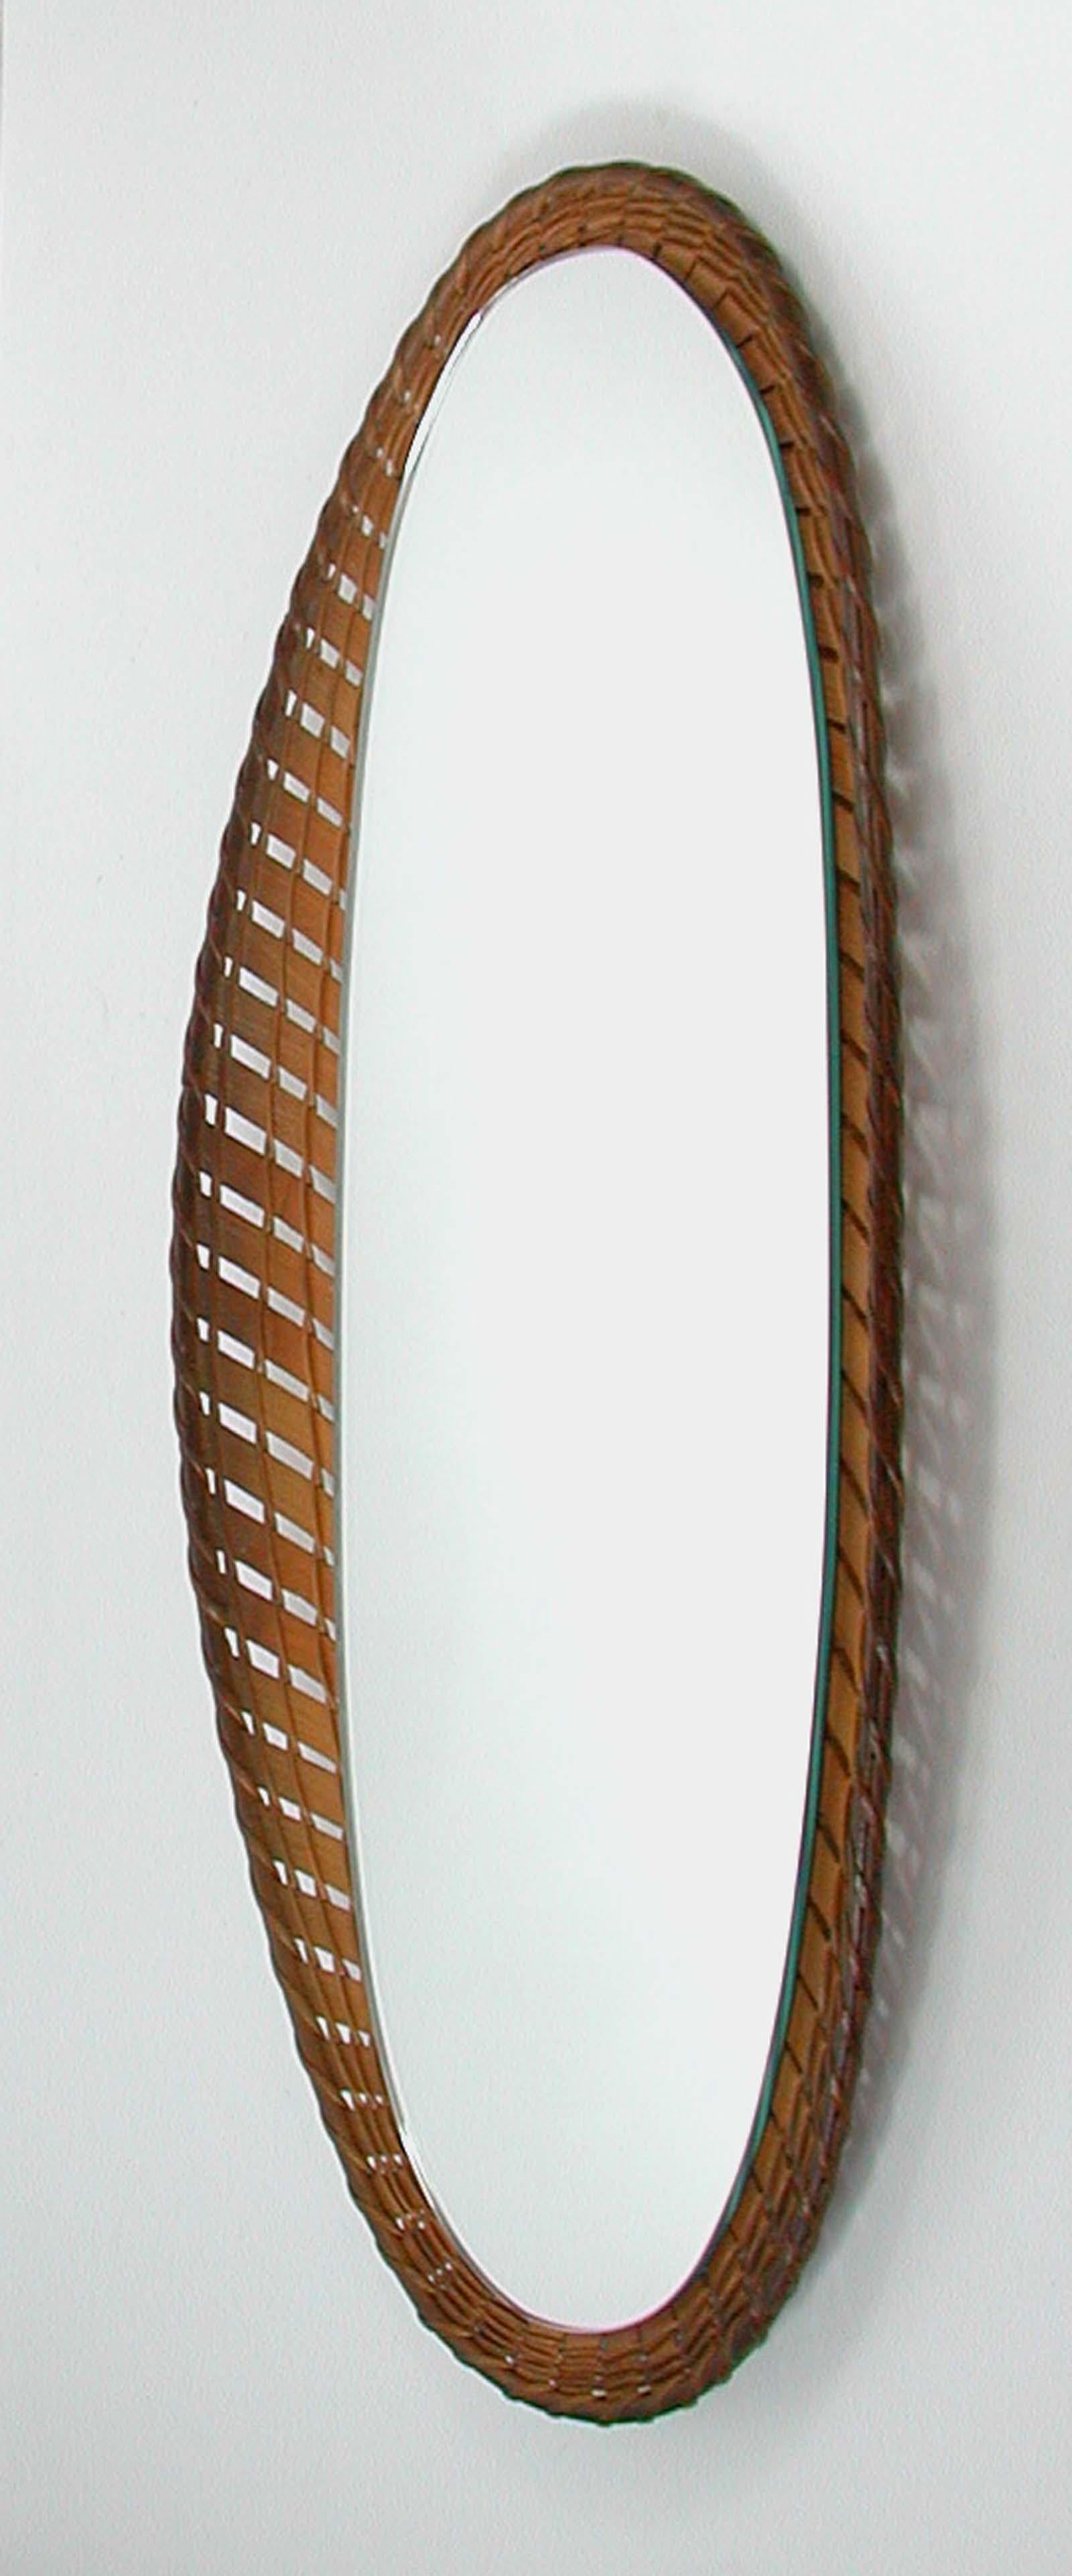 Scandinavian Modern Large French Midcentury Oval Rattan and Wood Wall Mirror, 1950s